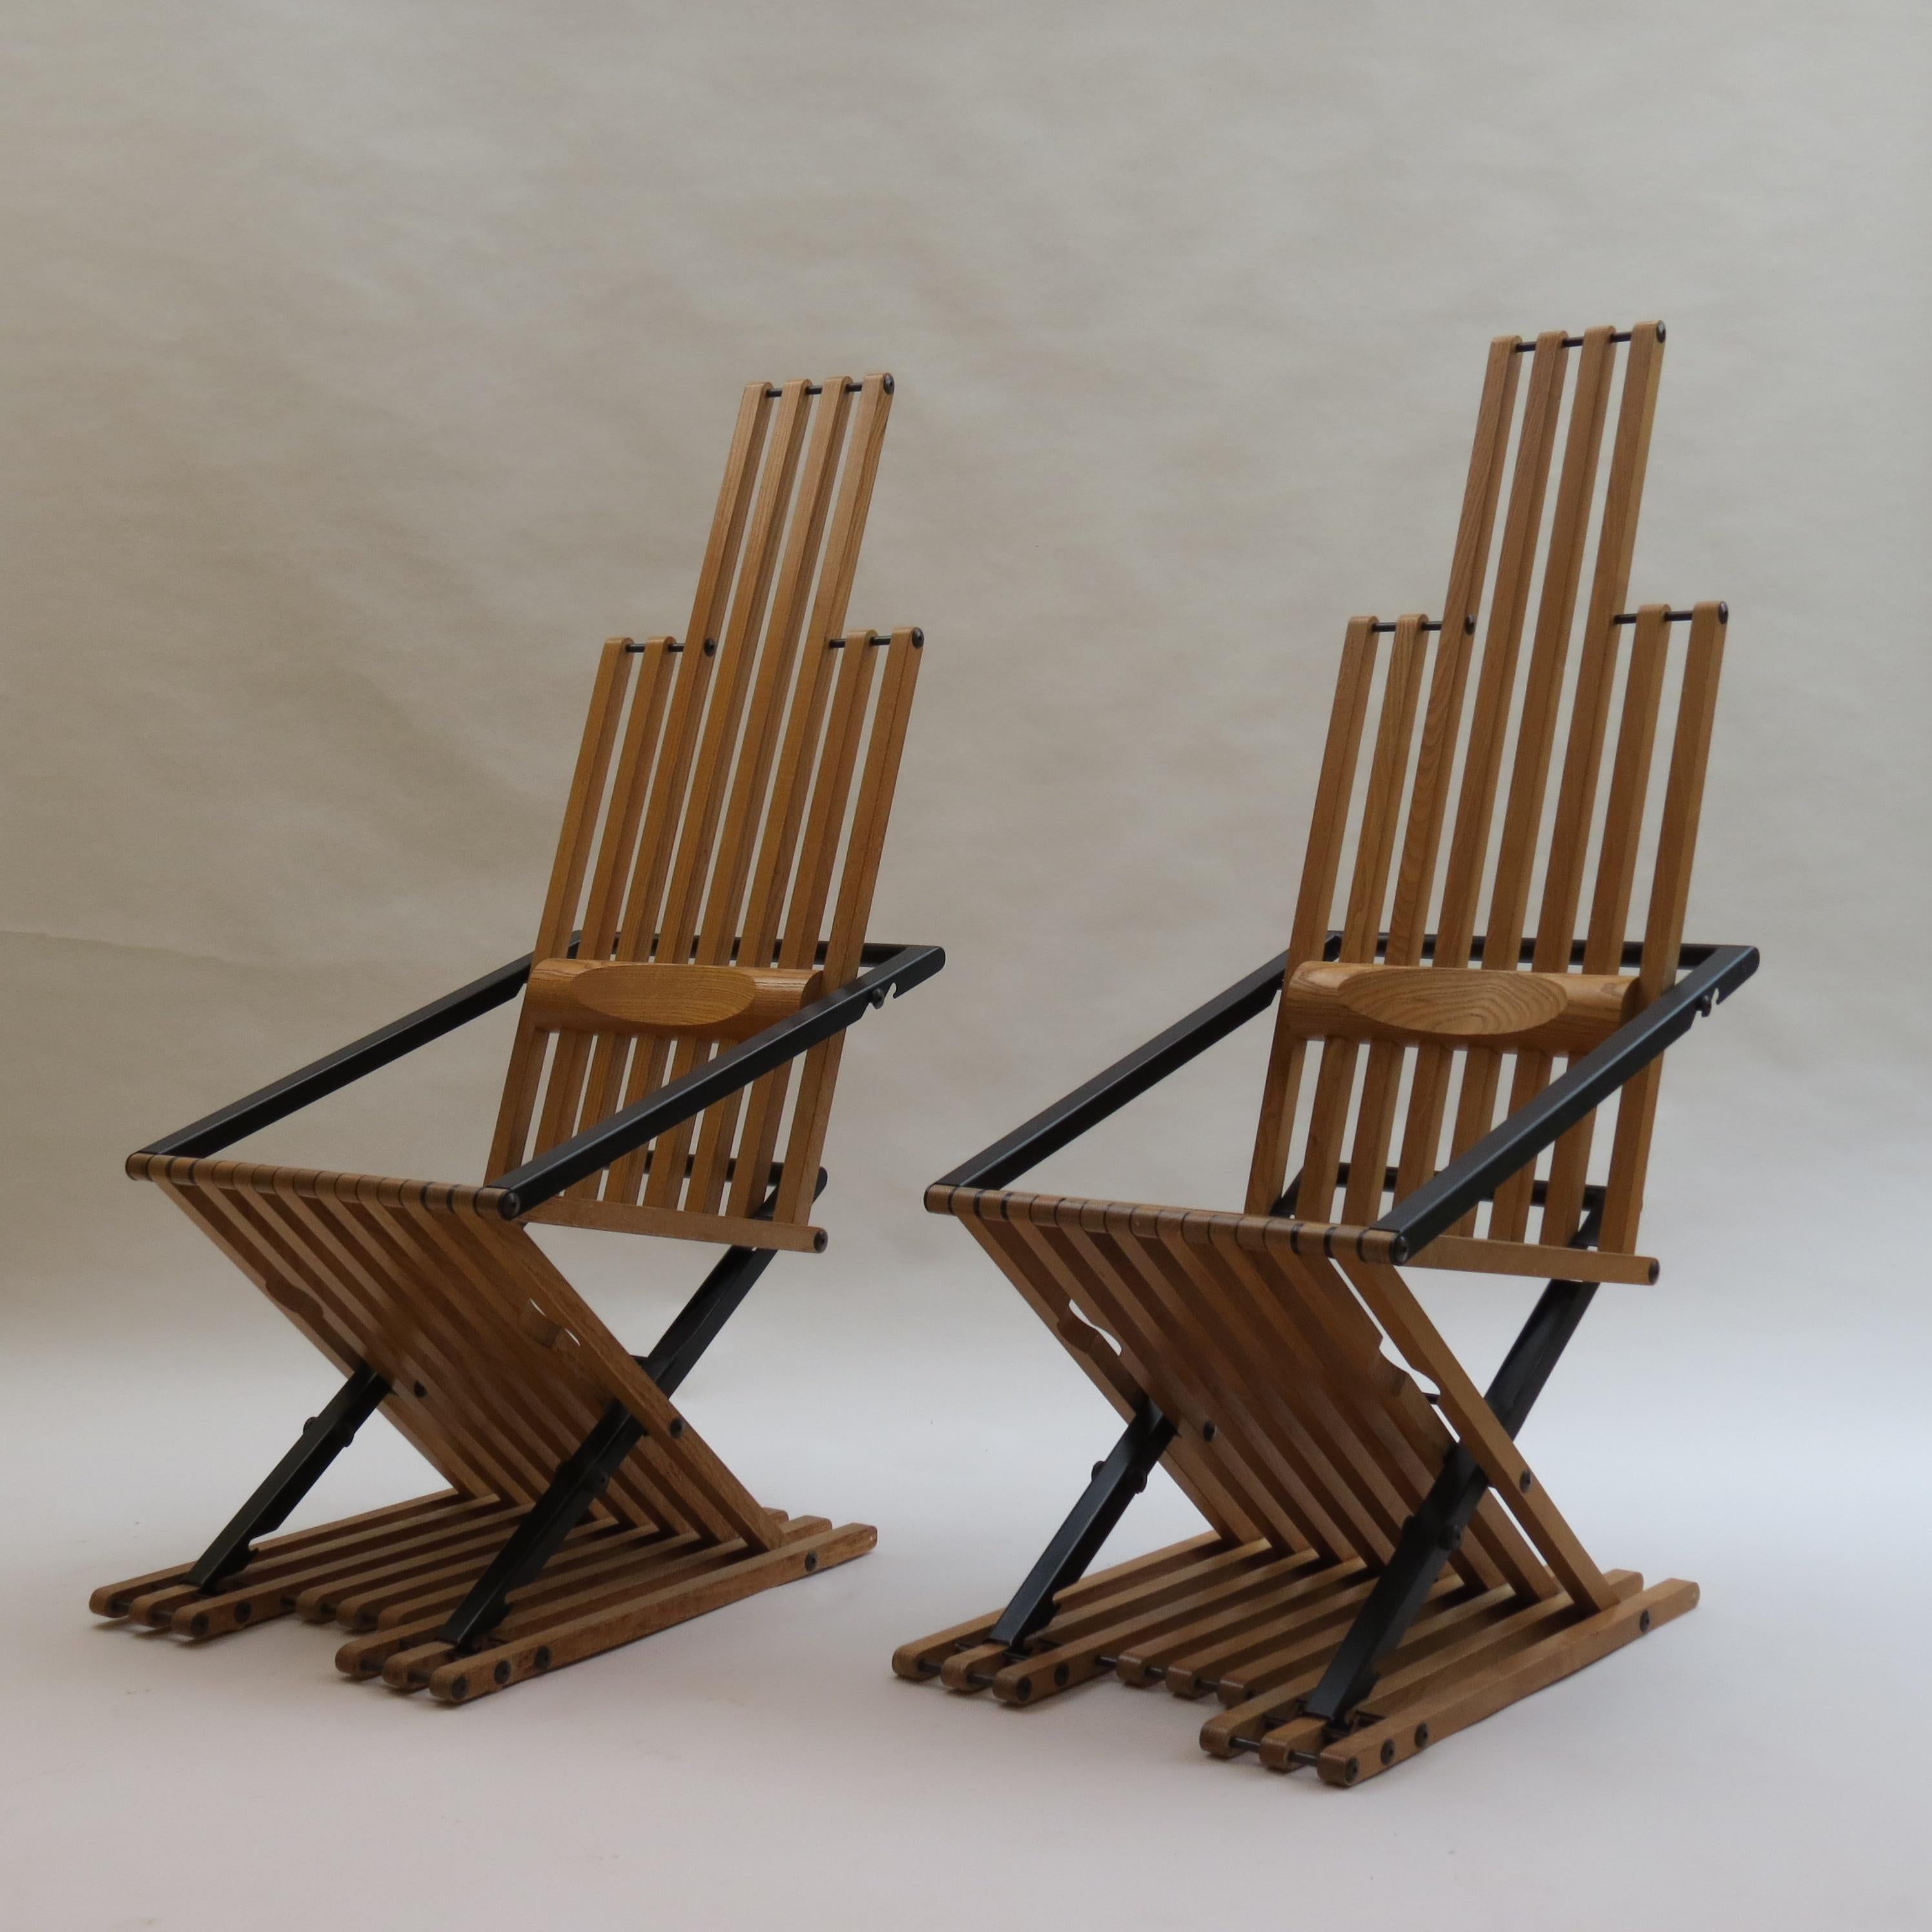 An important and rare pair of chairs designed by Jim Warren and produced by Pearl Dot, England, they date from 1979. Very cleverly designed to reflect the whole human body, in its function and the positions the human body may pose in the practice of